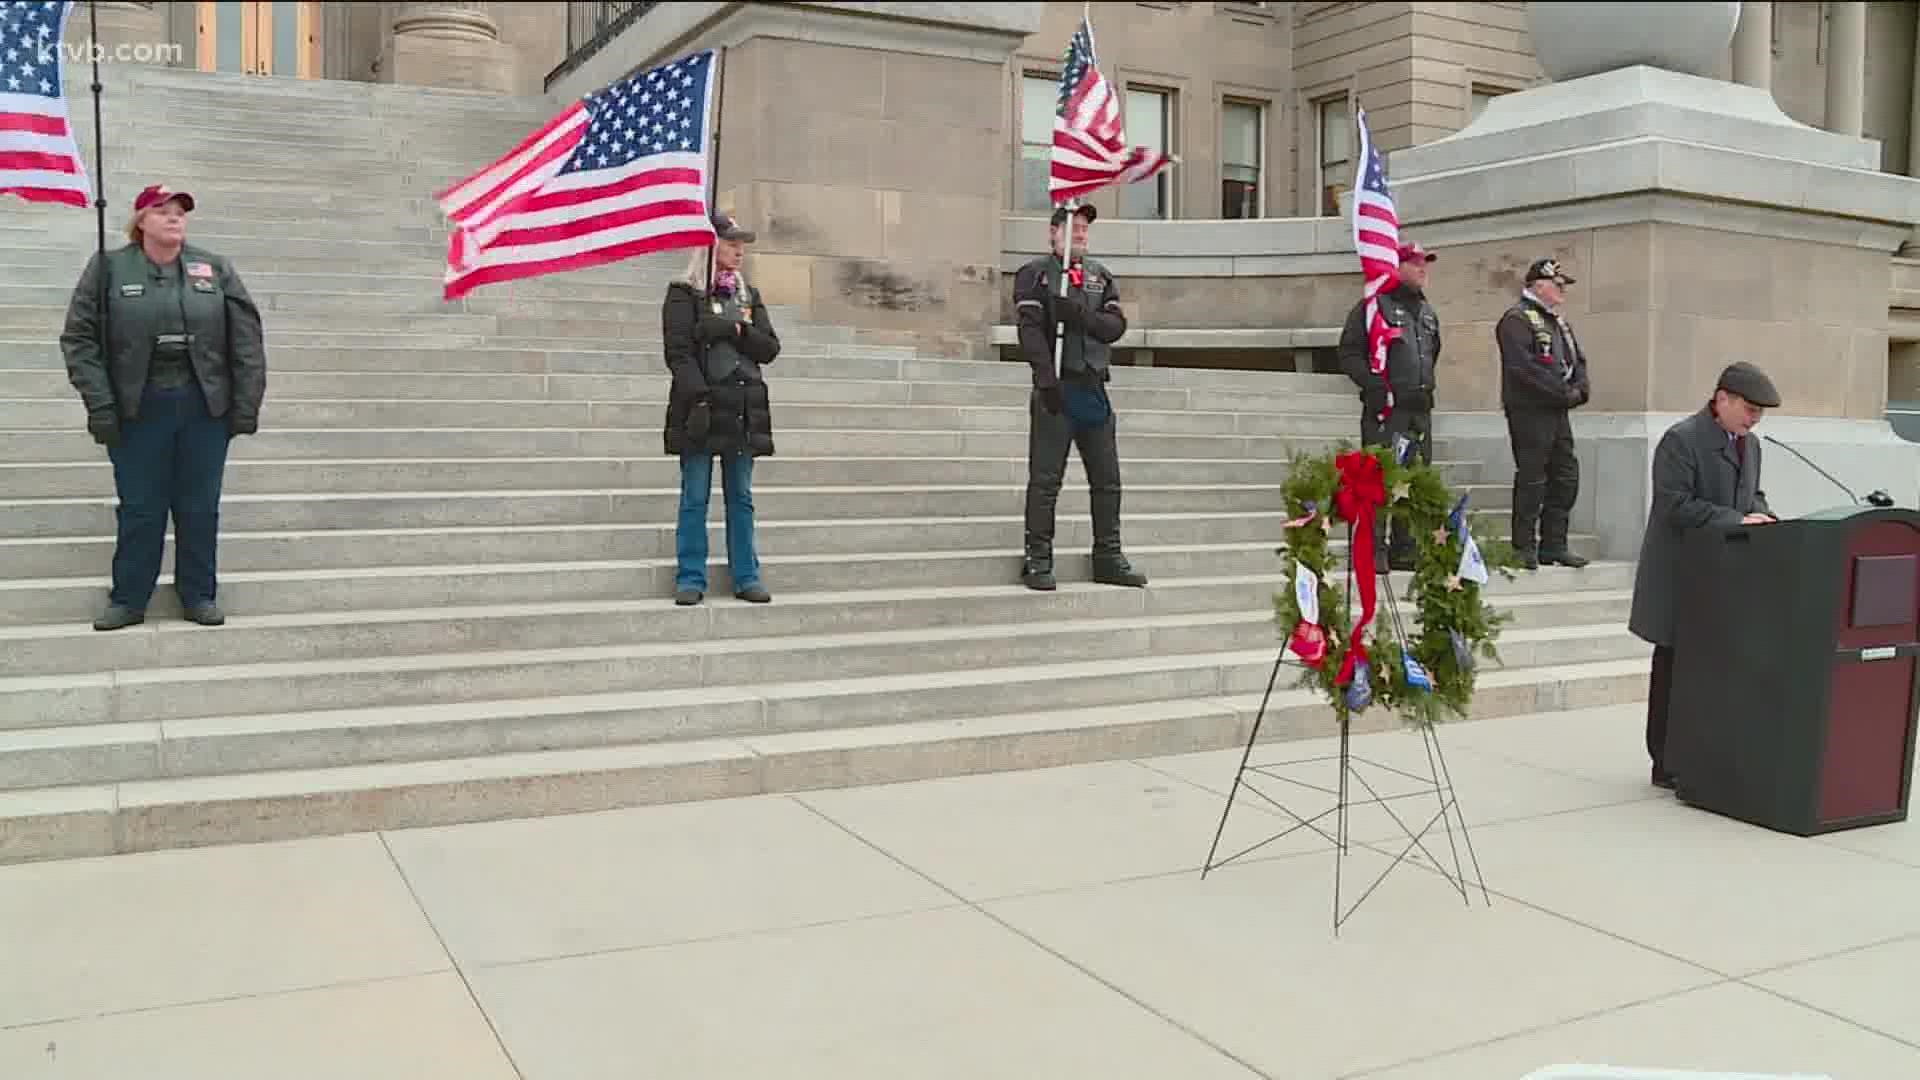 The nonprofit held a wreath-laying ceremony Monday on the steps of the capital.